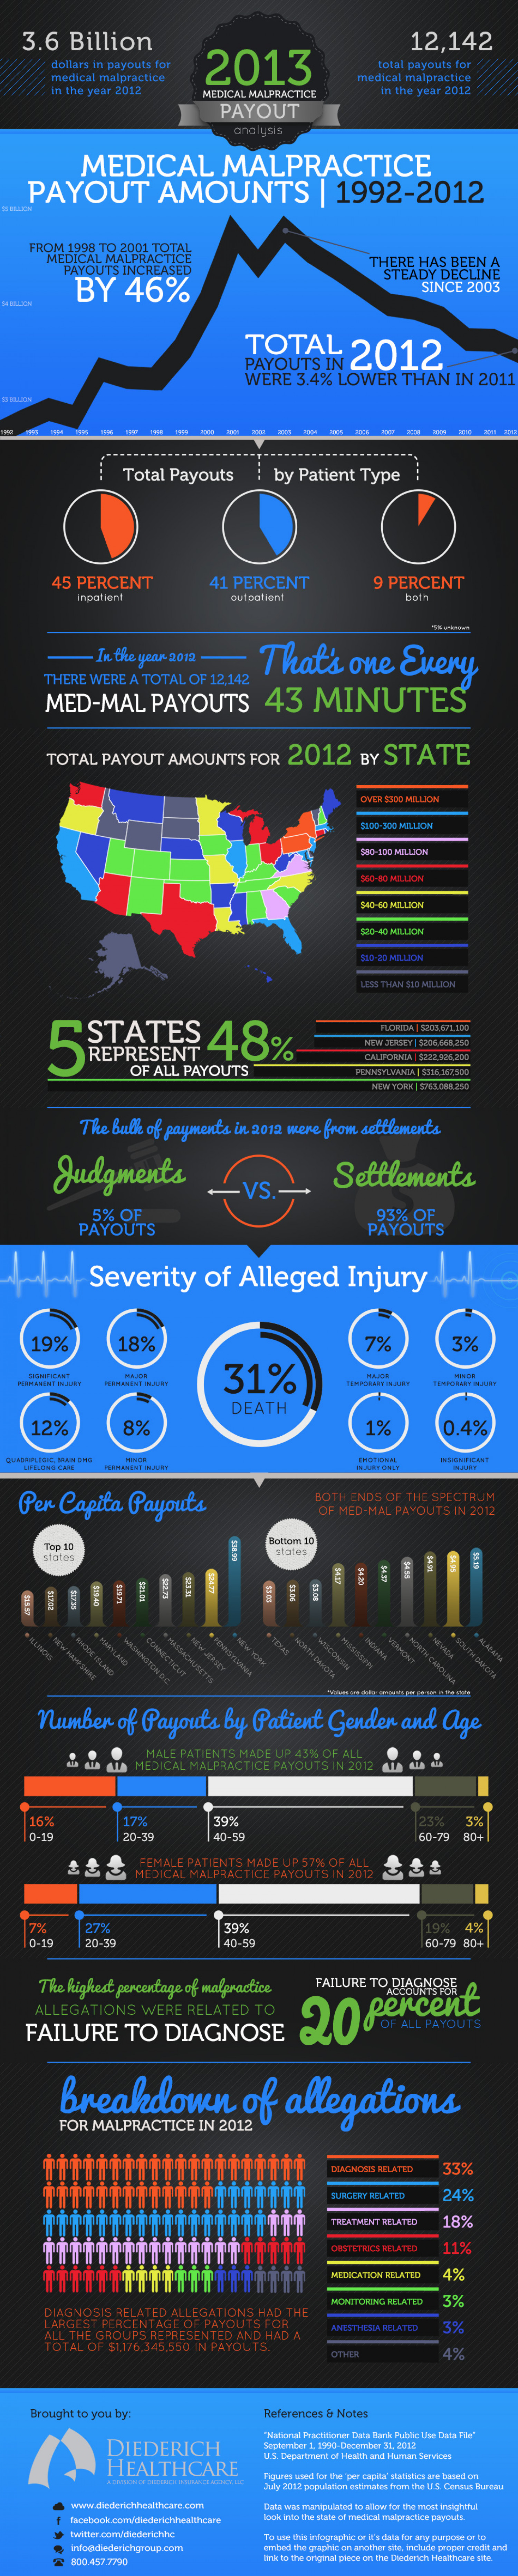 2013 Medical Malpractice Payout Analysis Infographic